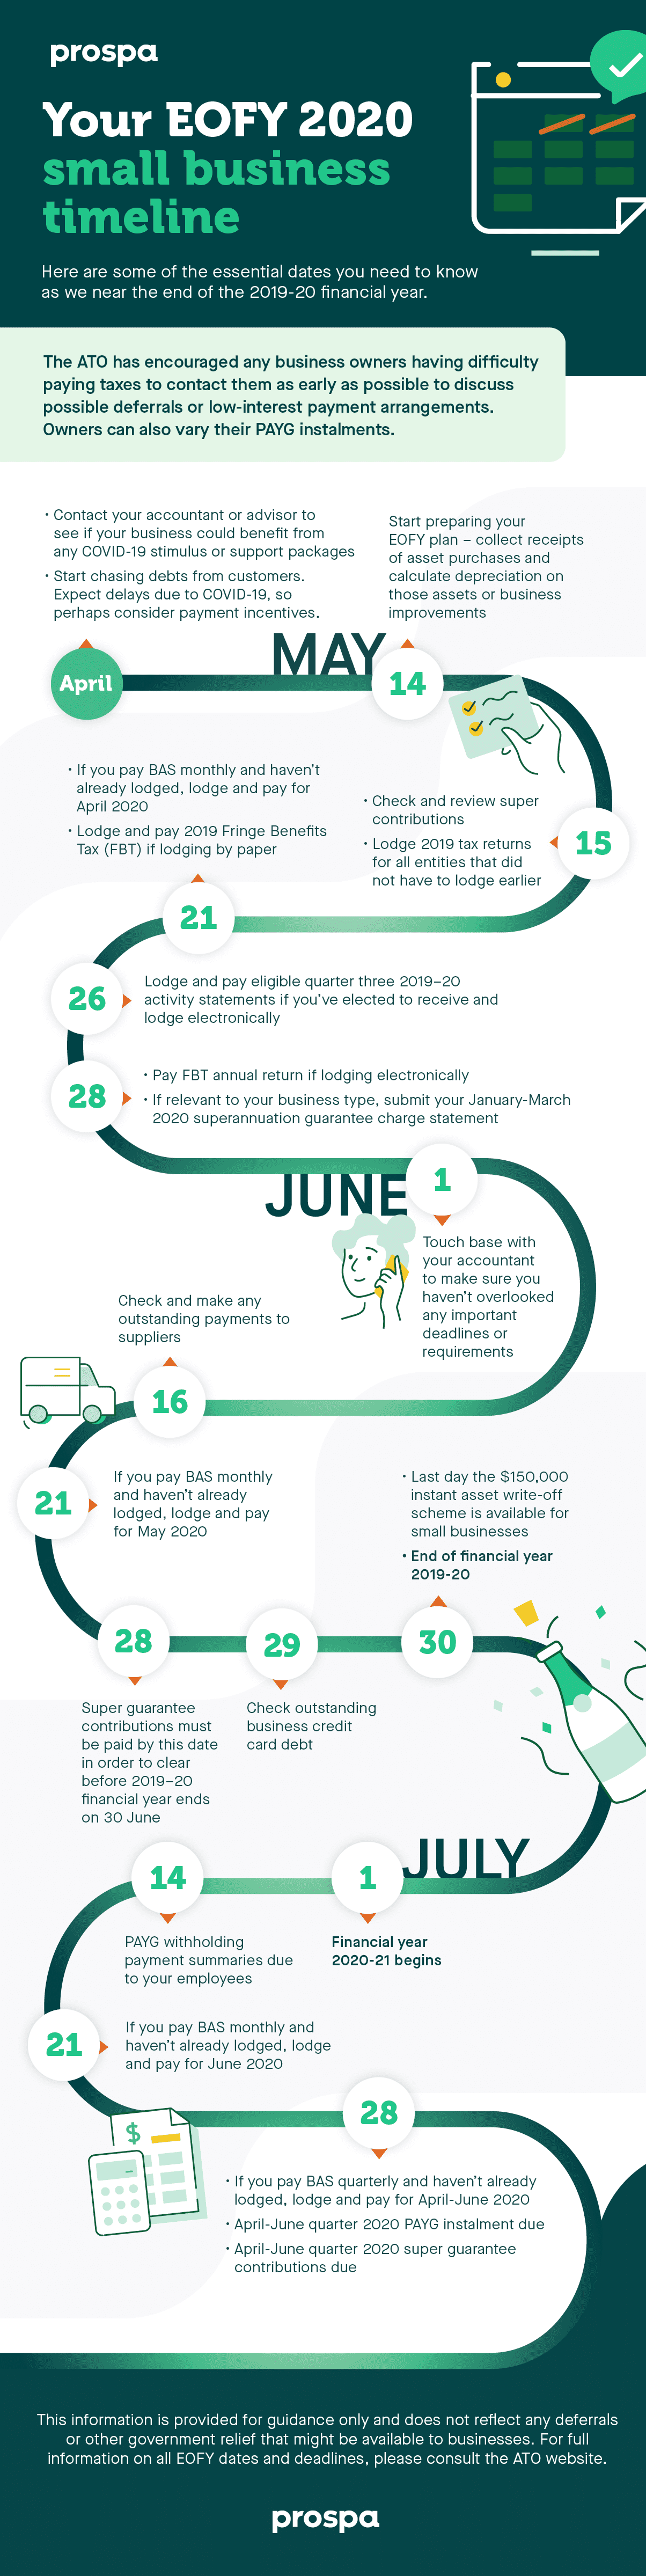 End of financial year 2019-20 - key dates